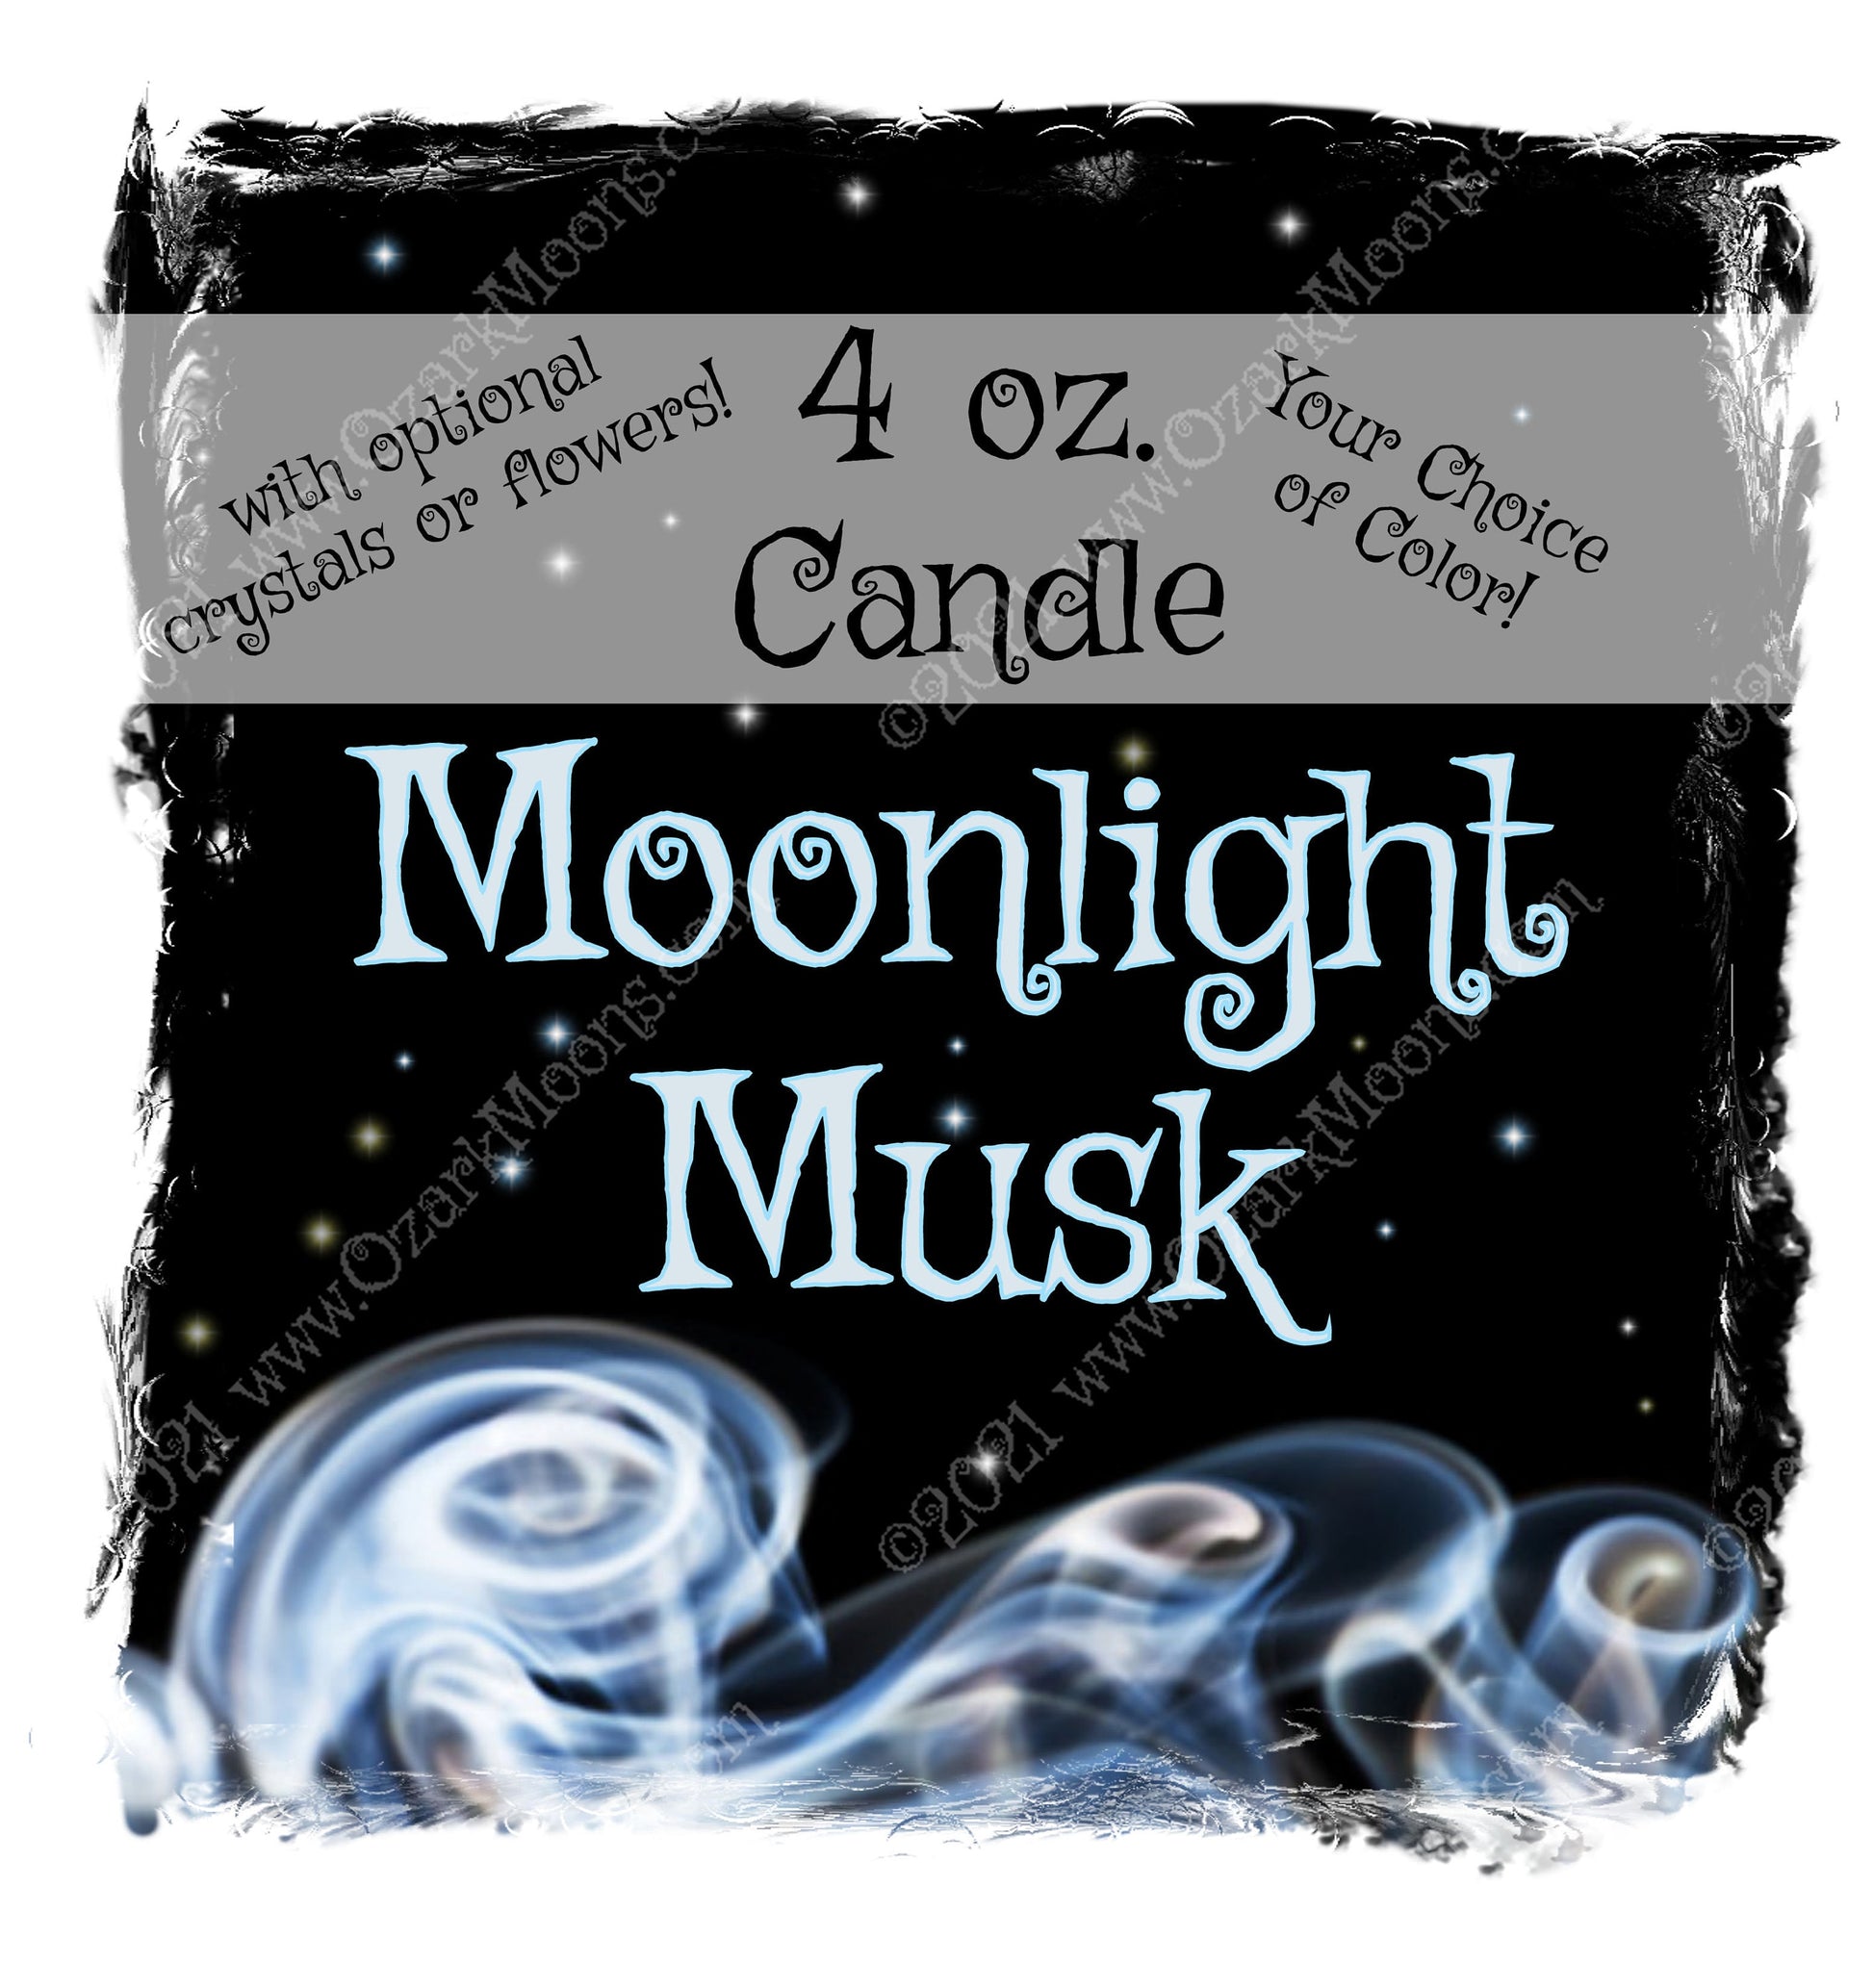 4 oz Candle Moonlight Musk - Soy Coconut Candles with Highly Scented Sensual Sexy Musk, Incense, and High-End Cologne Scent in Tin with Lid